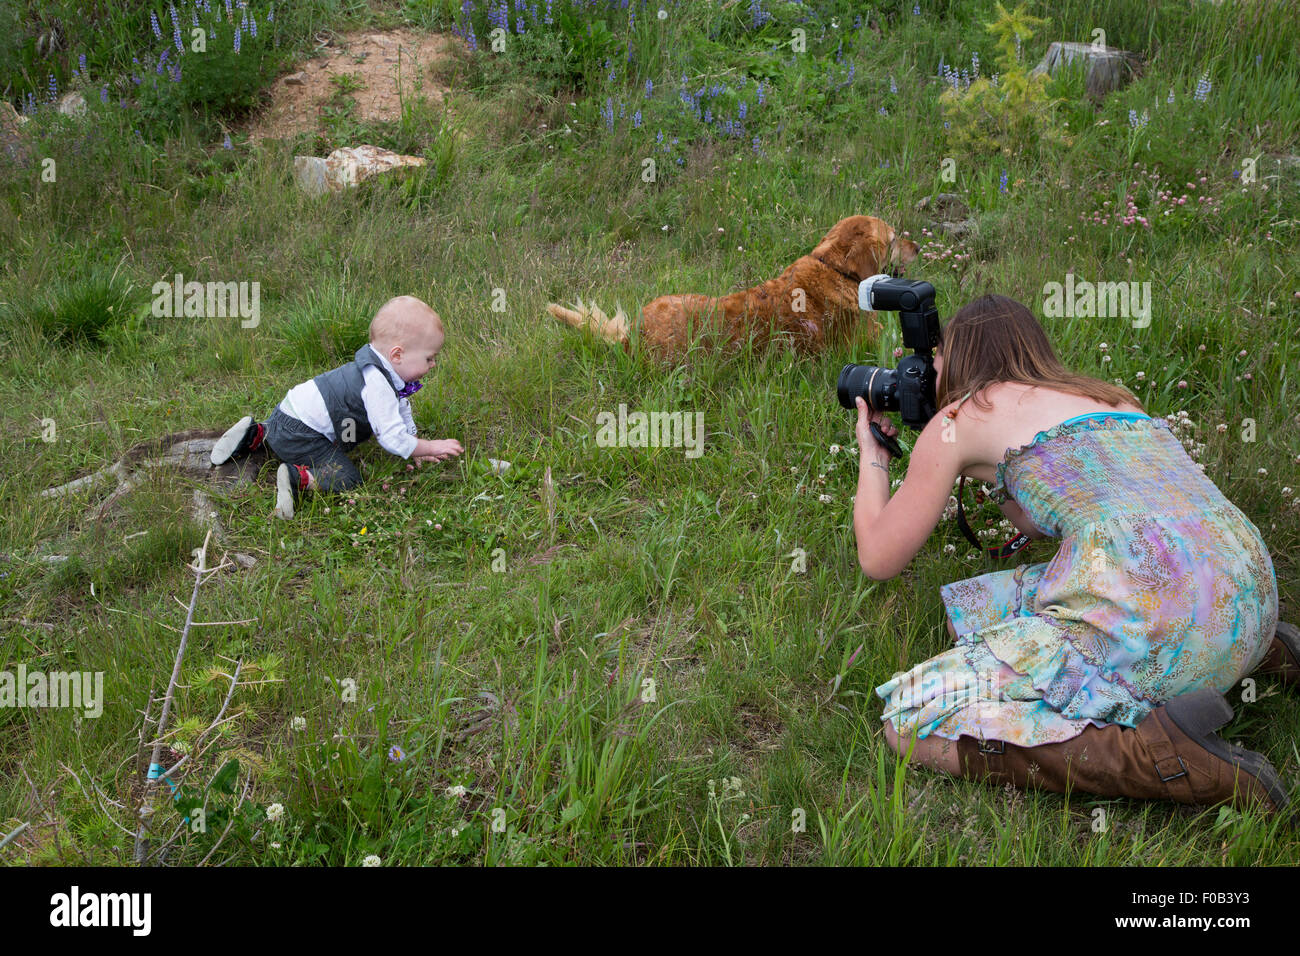 Dillon, Colorado - Wedding photographer Joy Tate photographs year-old Adam Hjermstad, Jr. on the day of his parents' marriage. Stock Photo